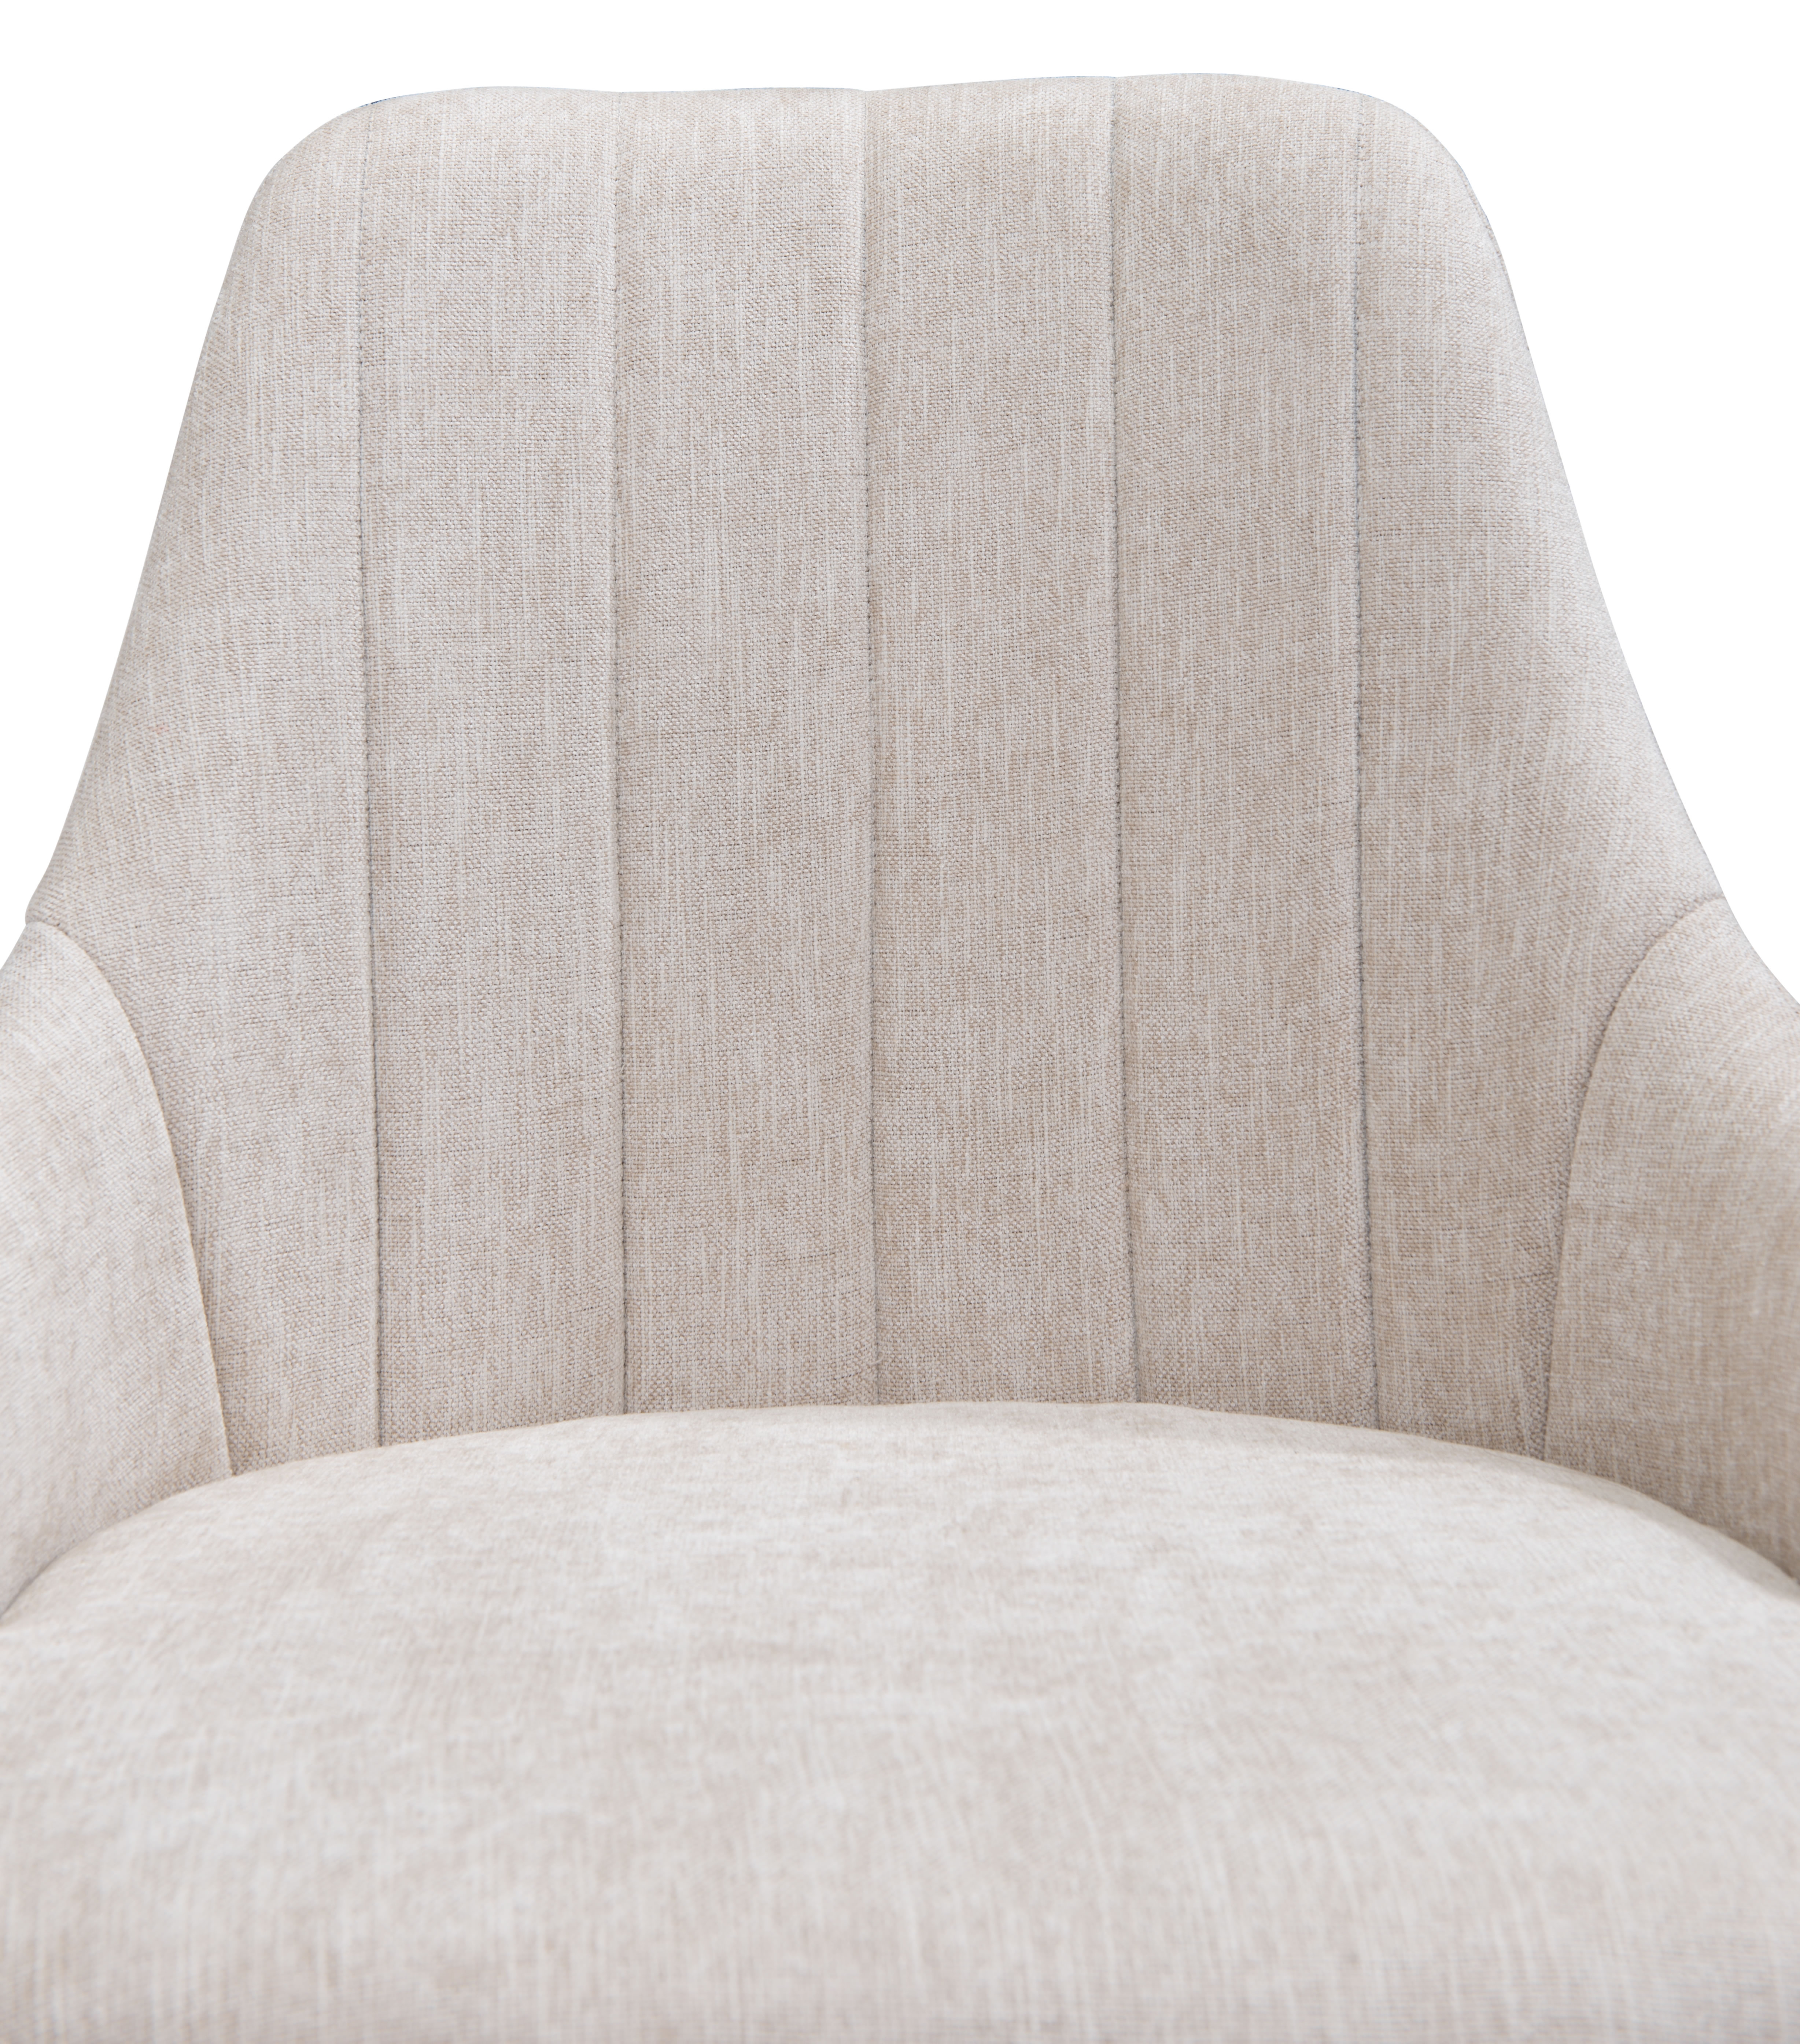 Gables Office Chair, White Poly Linen - Image 8